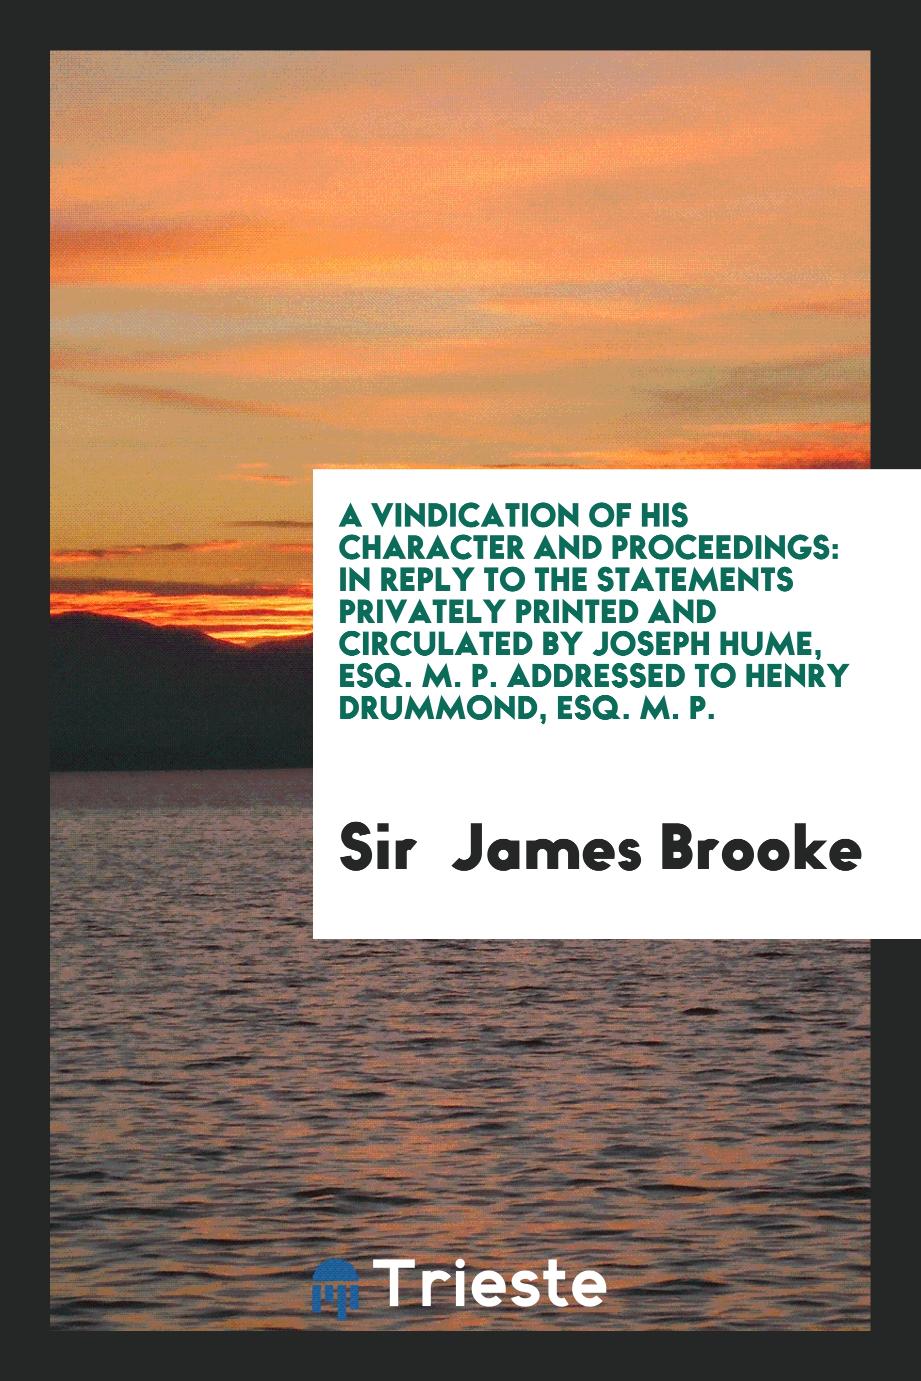 A Vindication of His Character and Proceedings: In Reply to the Statements Privately Printed and circulated by Joseph Hume, esq. M. P. addressed to Henry Drummond, esq. M. P.